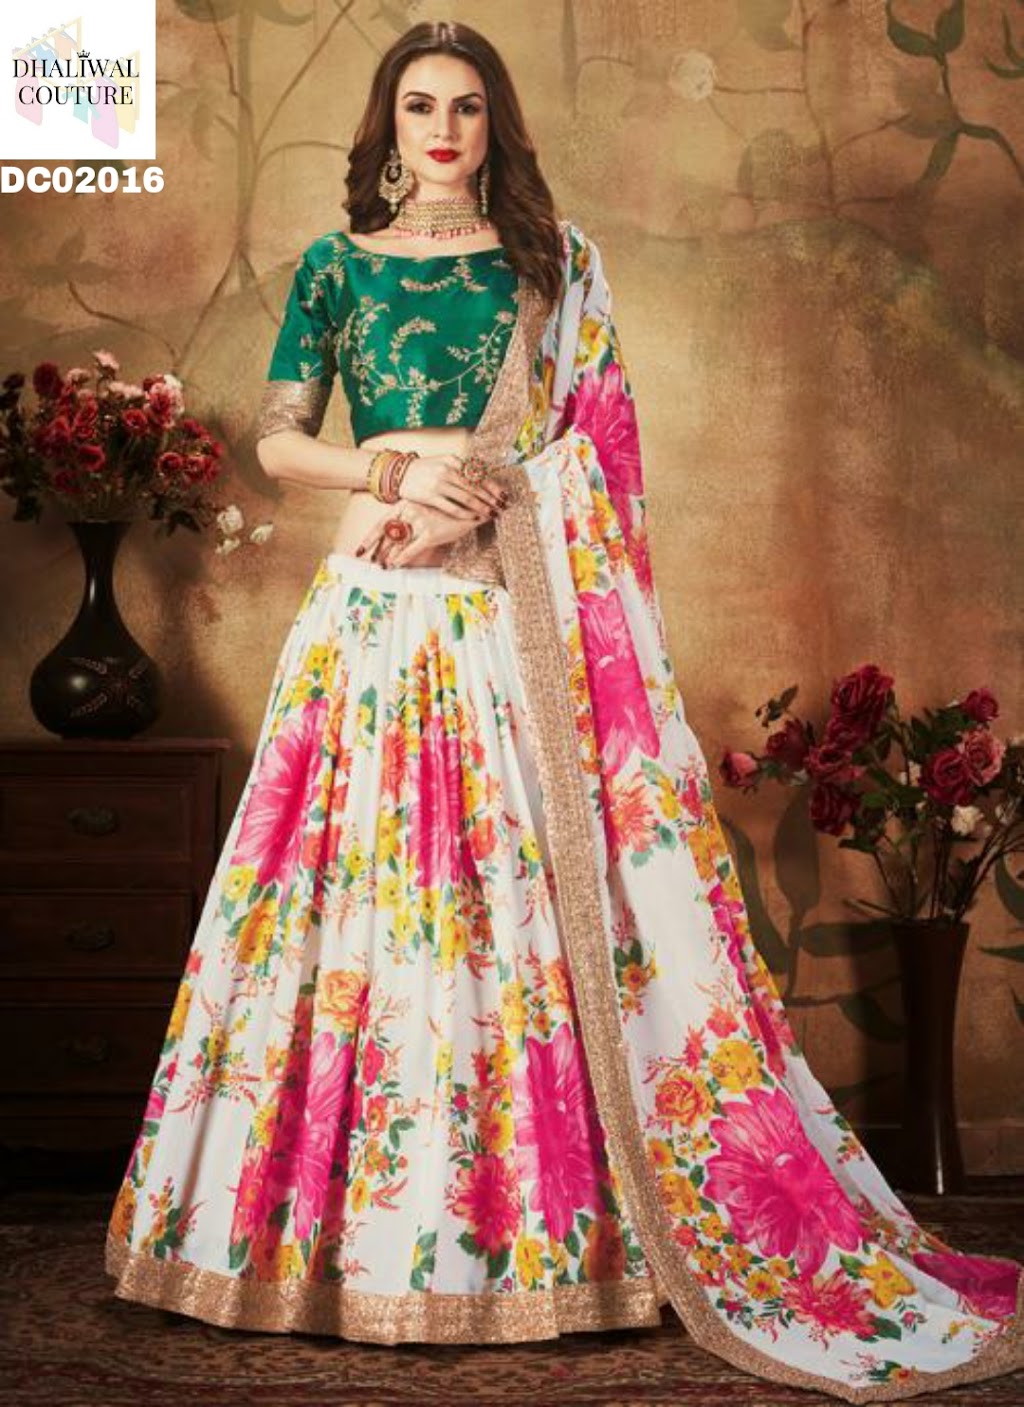 Dhaliwal Couture | clothing store | 13060 59A Ave, Surrey, BC V3X 0G5, Canada | 7789574045 OR +1 778-957-4045